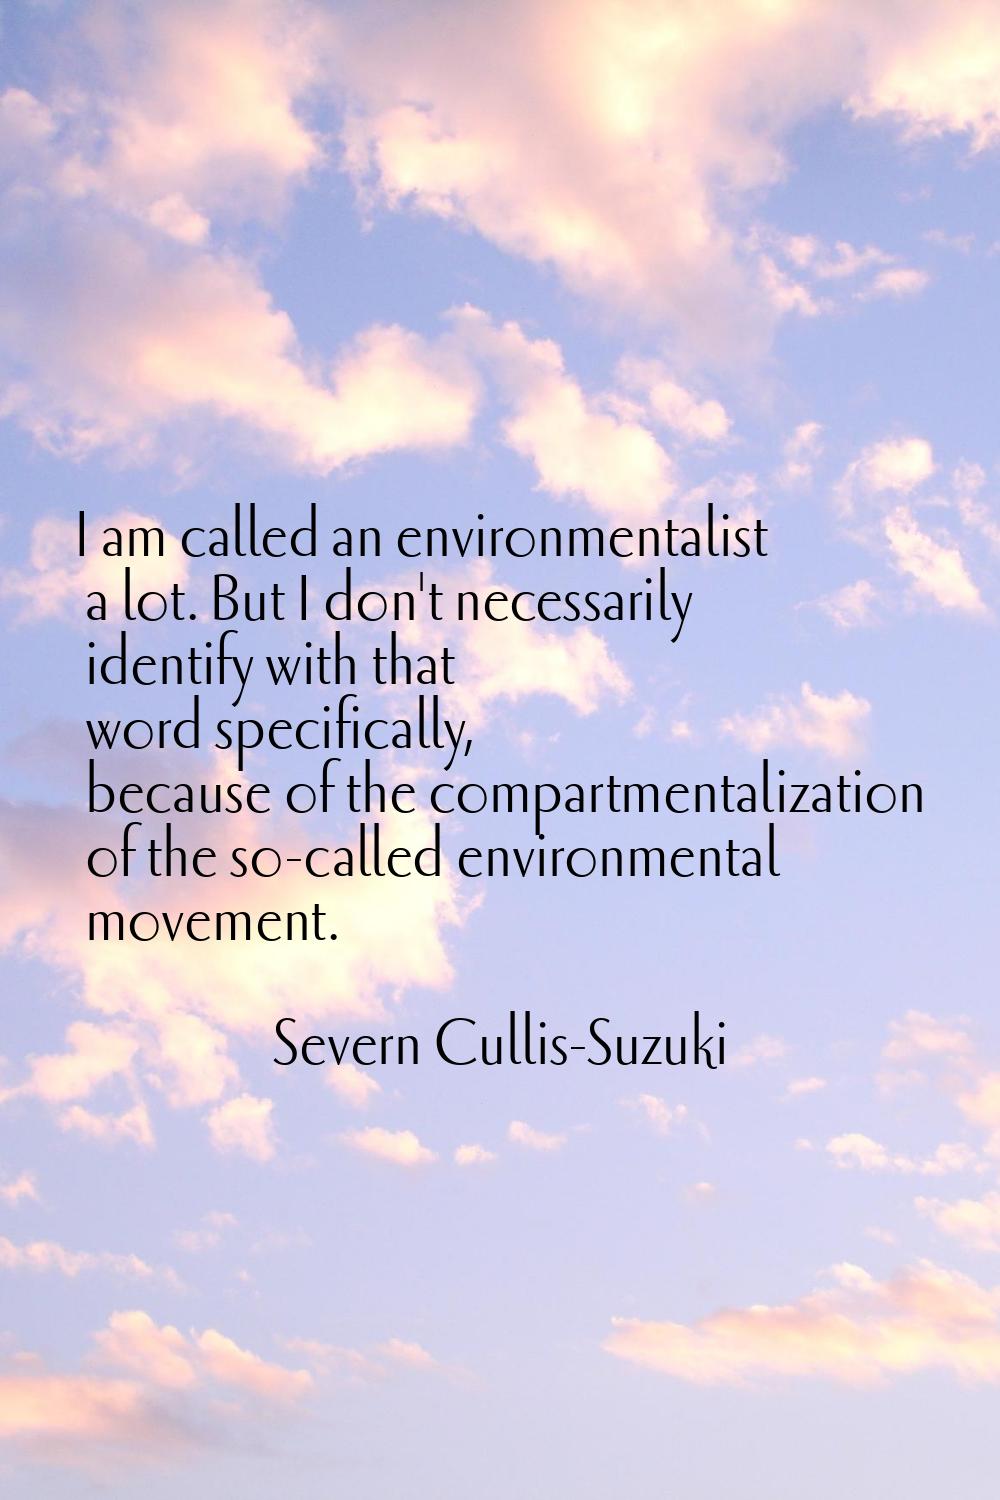 I am called an environmentalist a lot. But I don't necessarily identify with that word specifically